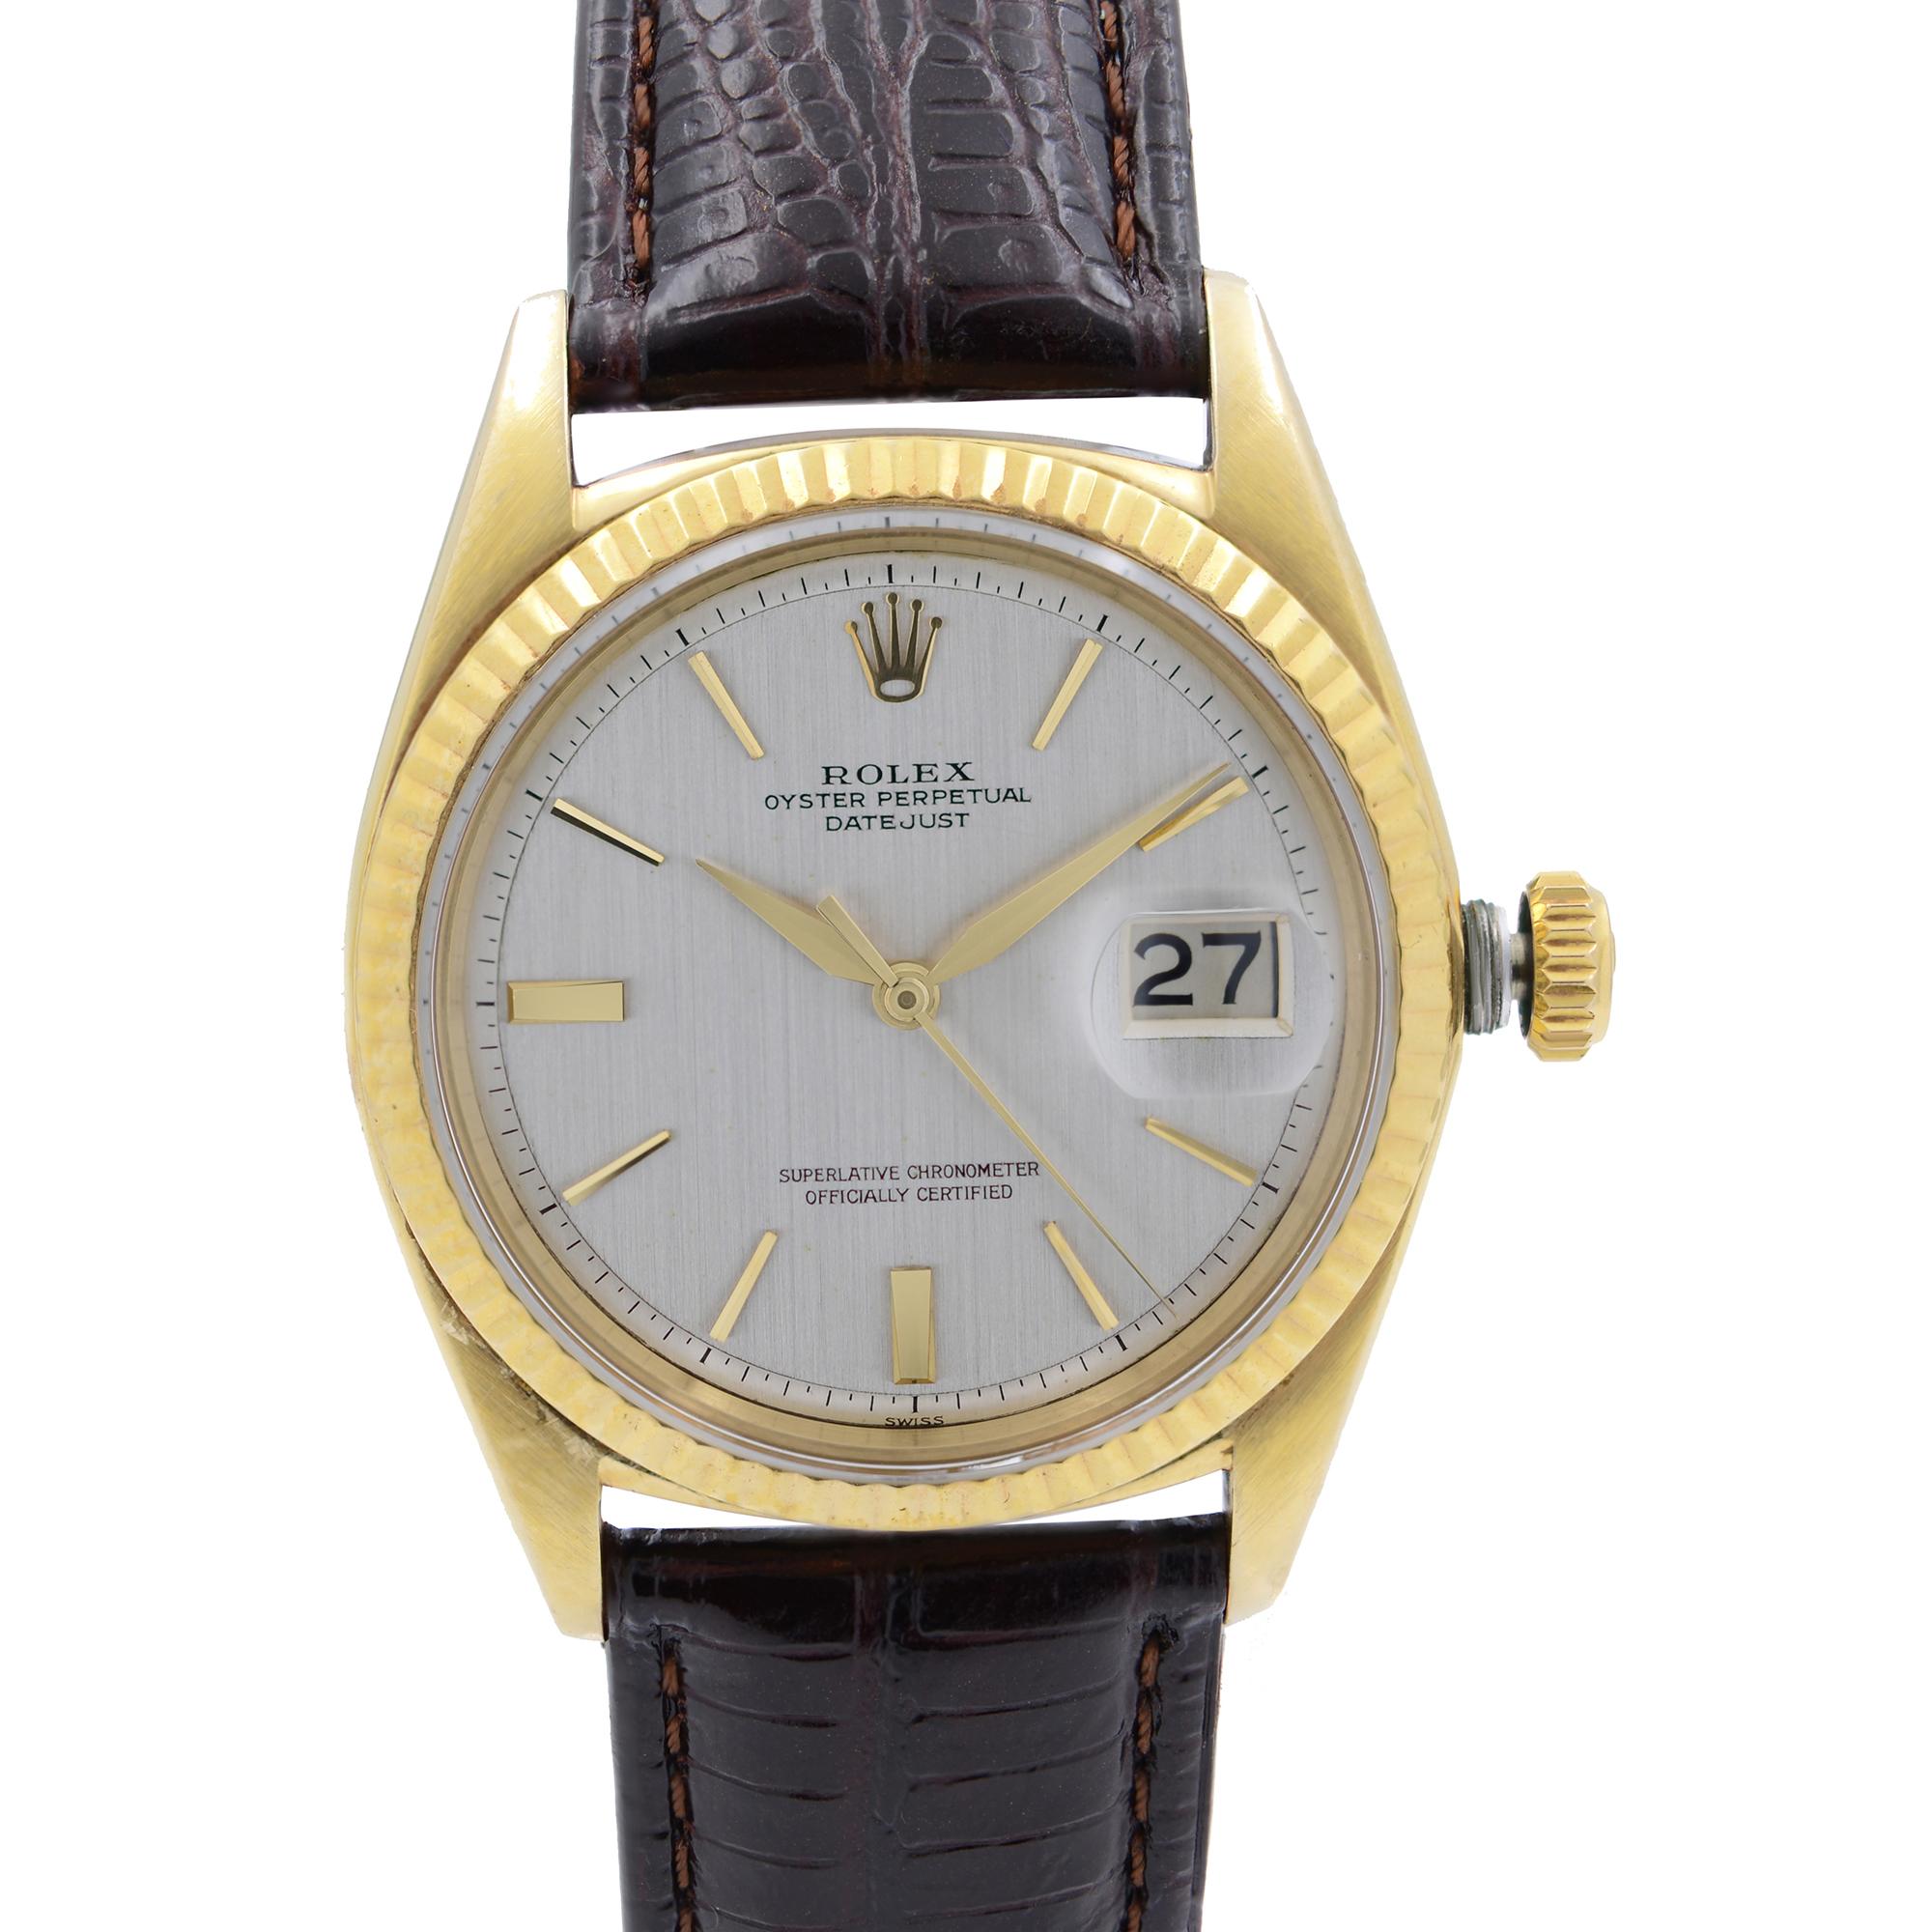 Pre Owned Vintage Rolex Datejust 14K Yellow Gold Silver Dial Automatic Men's Watch 1601. Minor Patina Signs on Dial due to aging.  Watch Was produced Circa the 1950s. This Beautiful Timepiece is Powered by Mechanical (Automatic) Movement And